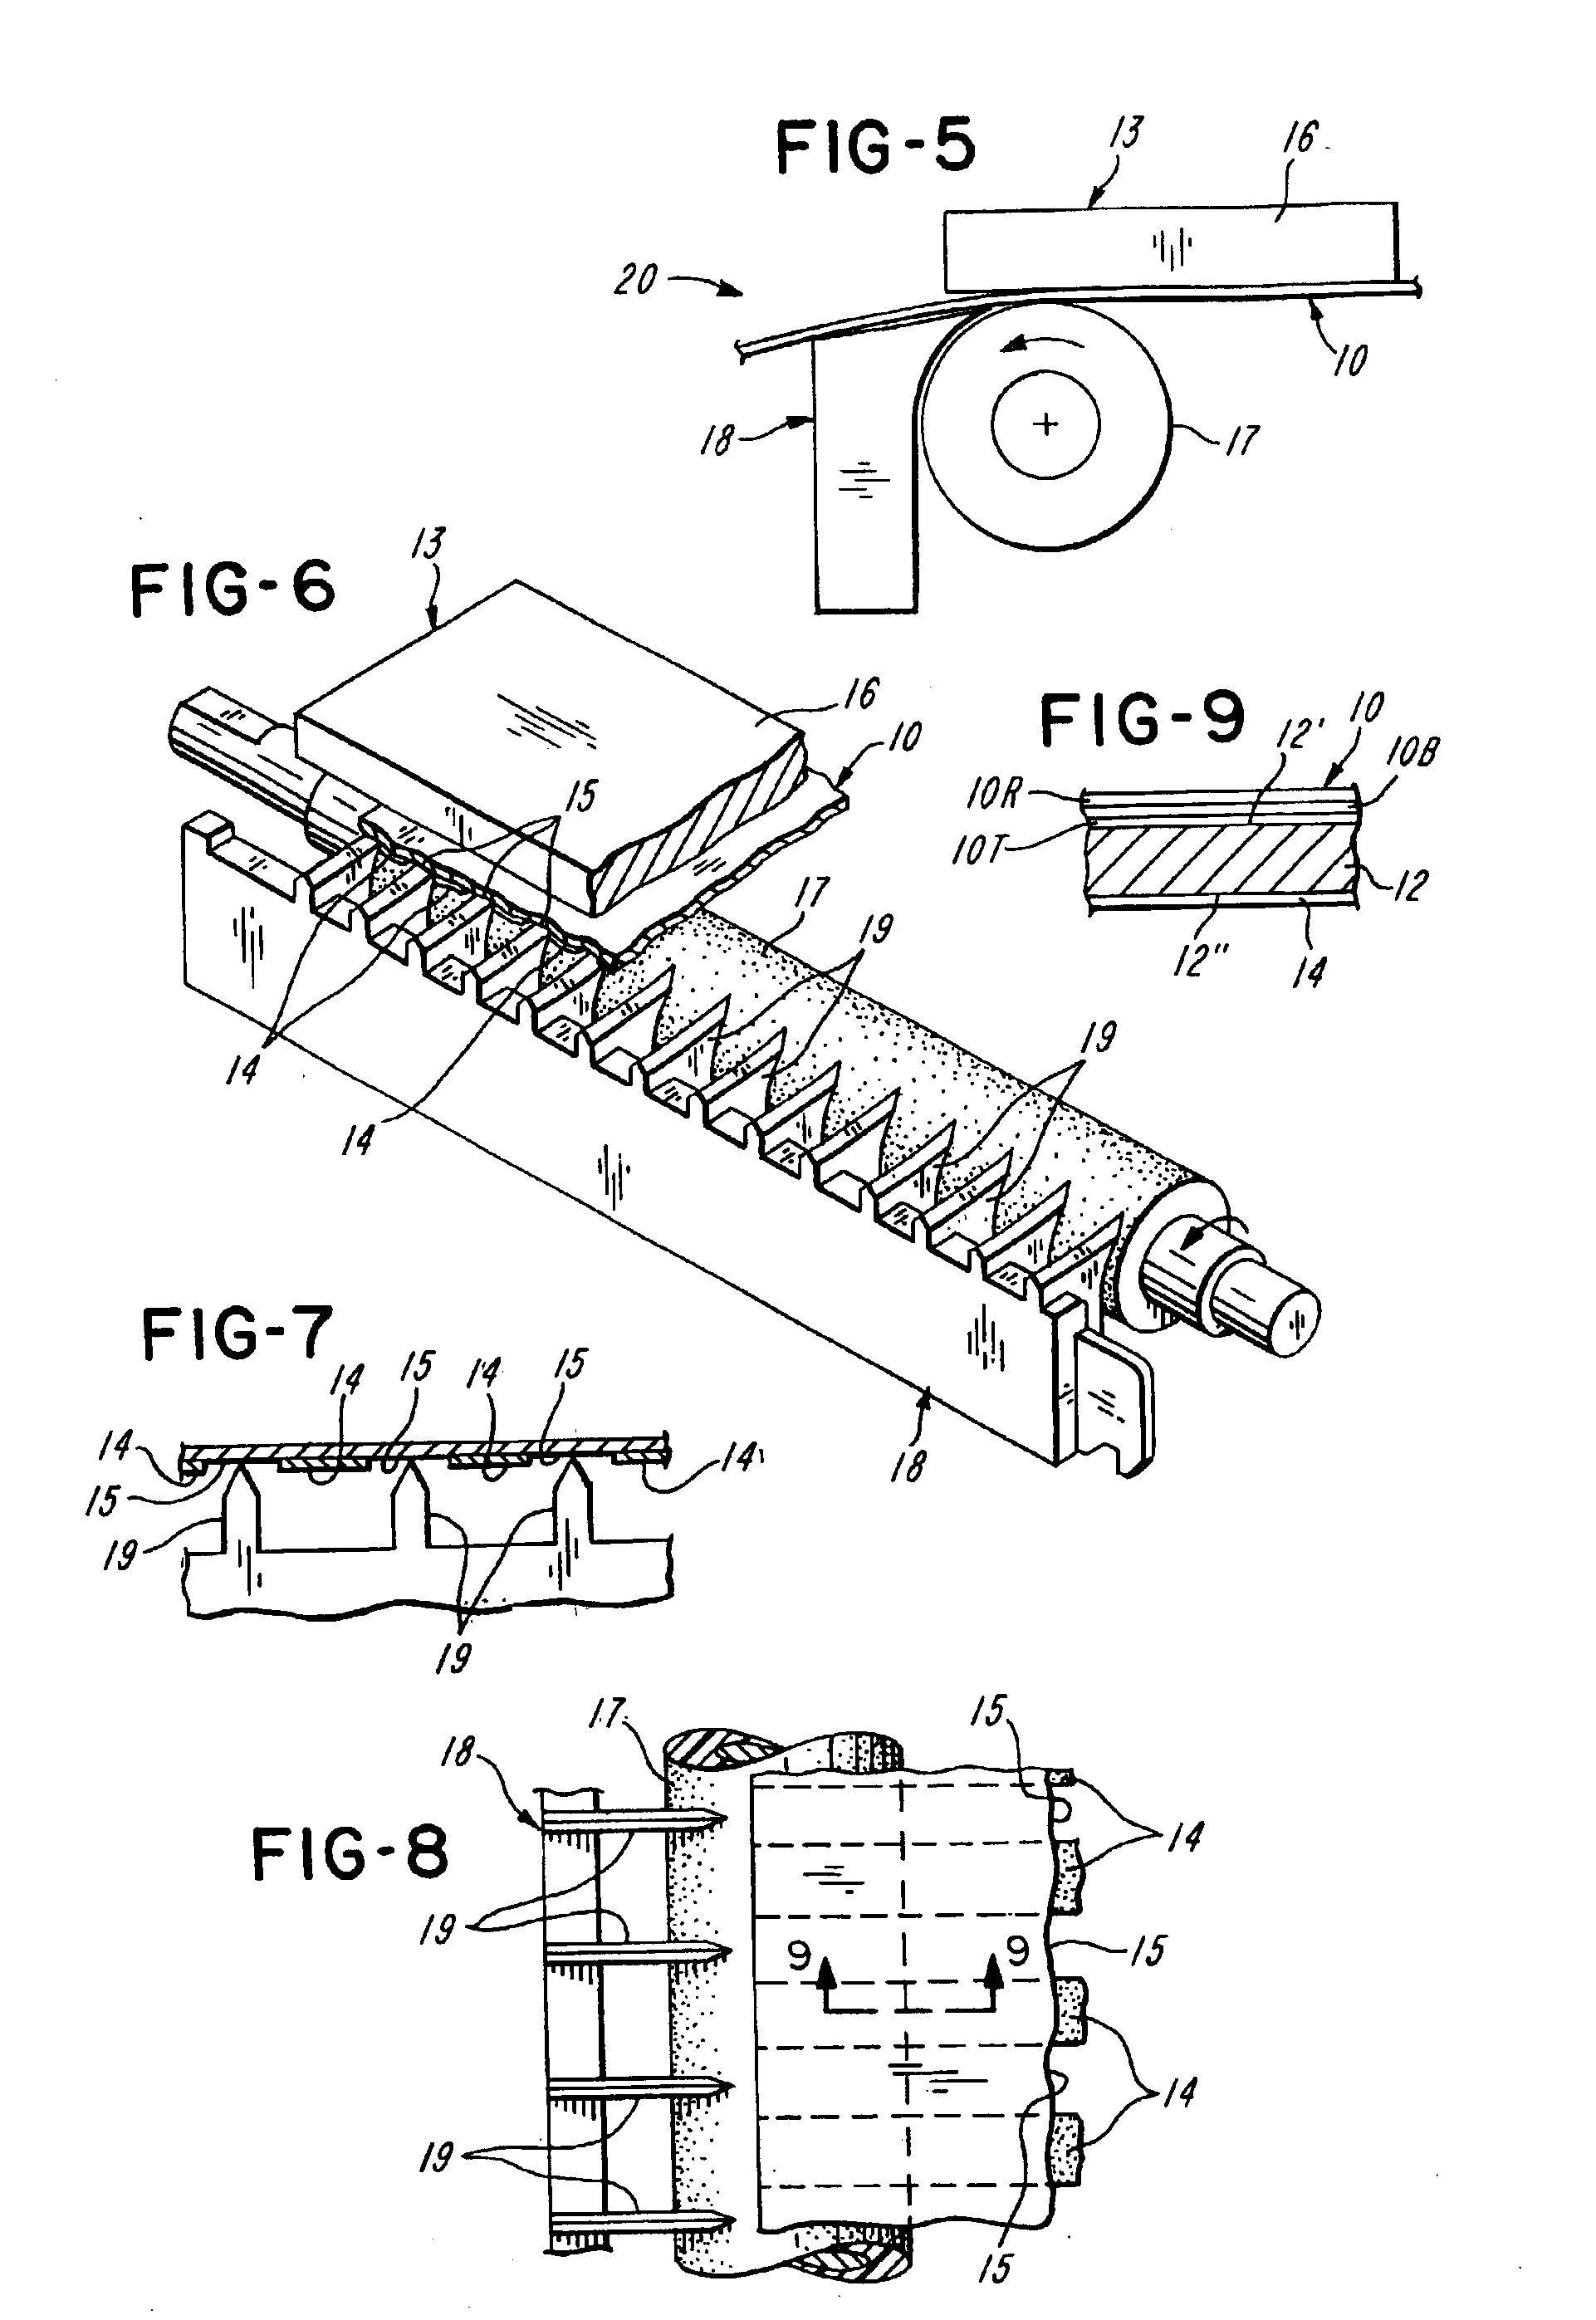 Method and system for handling a linerless label web